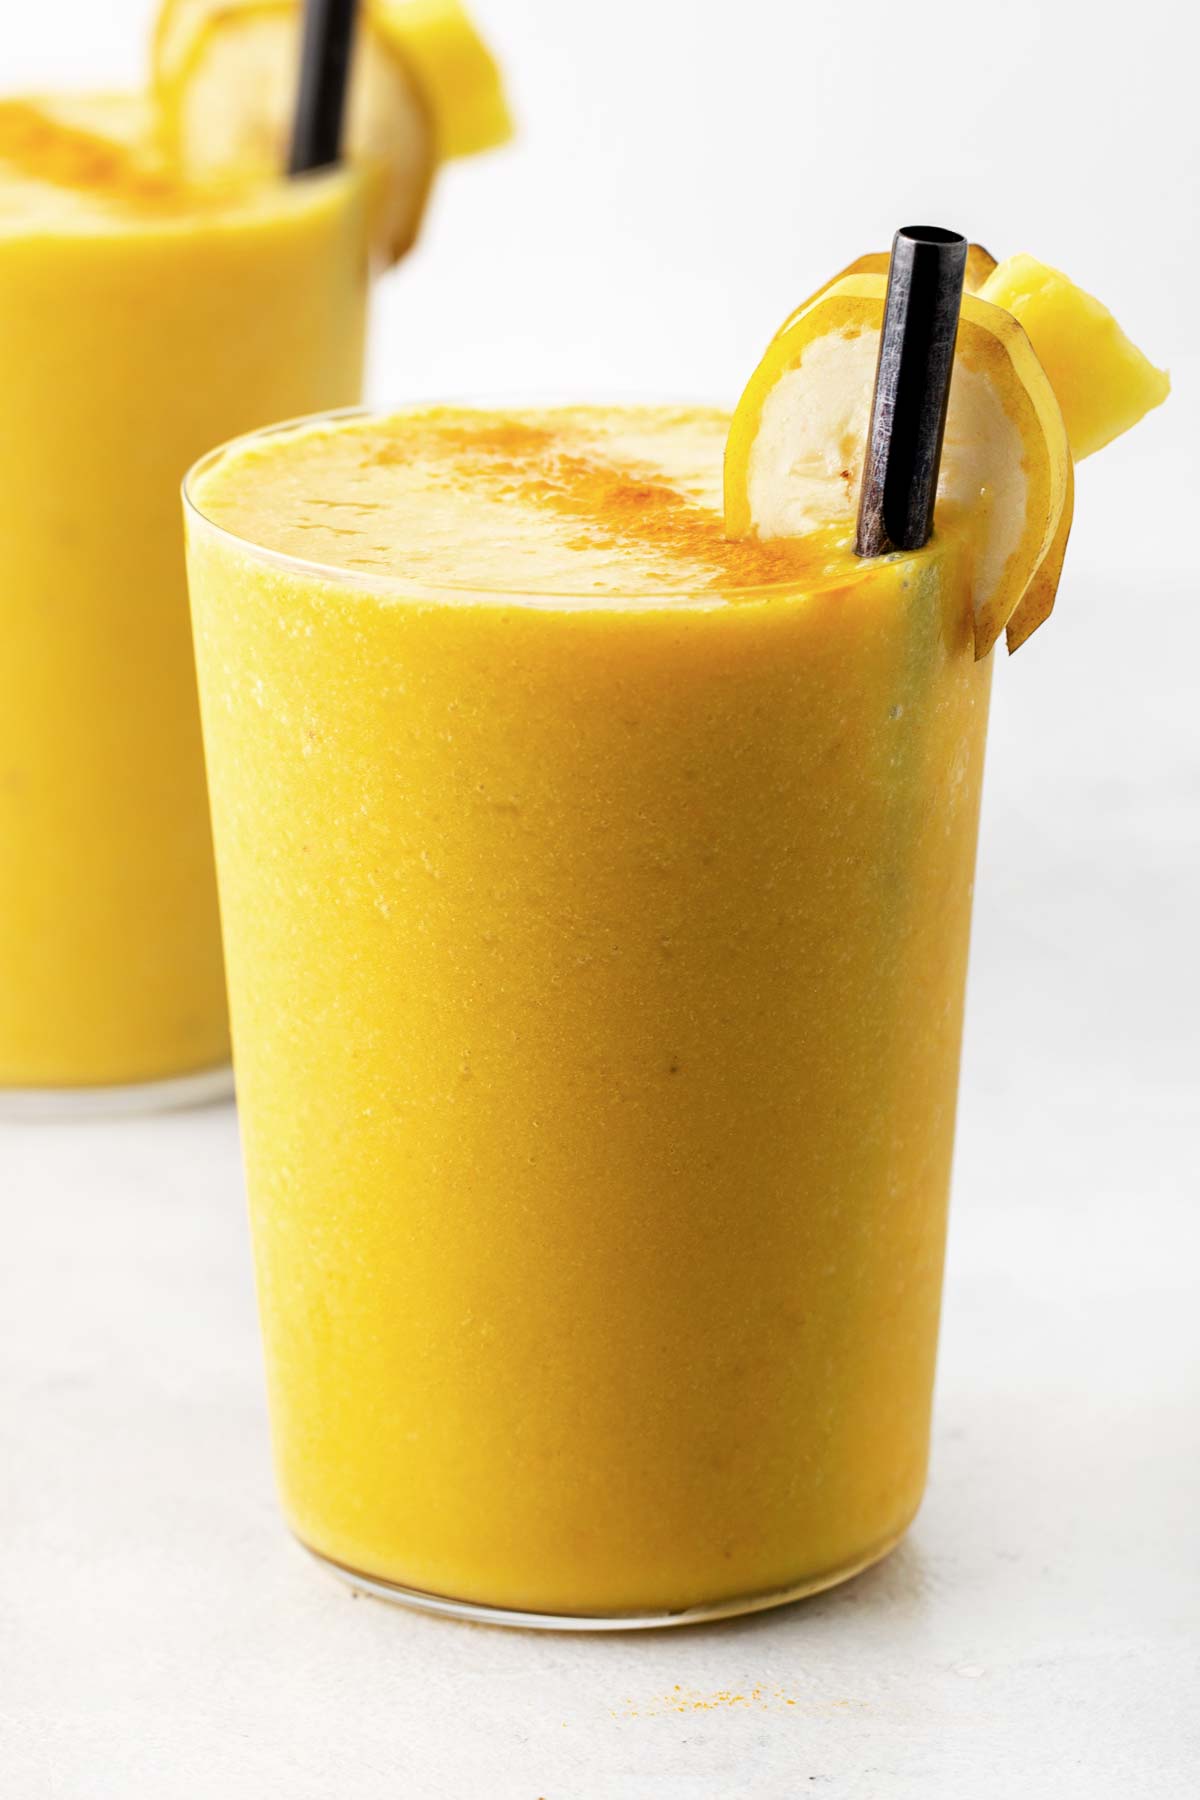 Turmeric smoothie in a glass.